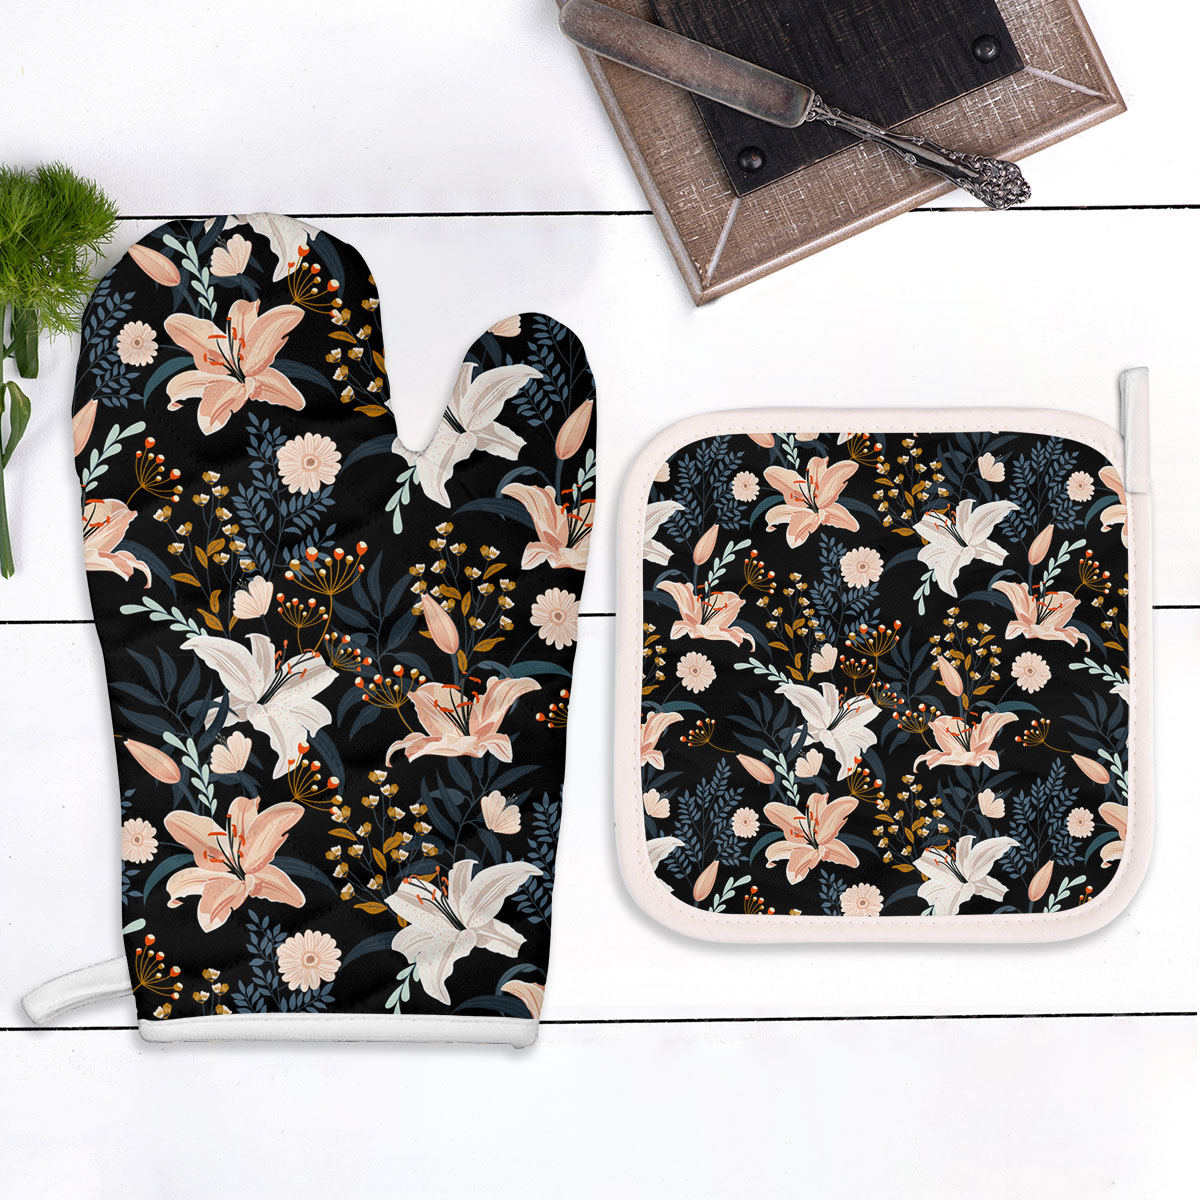 Retro Lily Flowers Oven Mitts Pot Holder Set